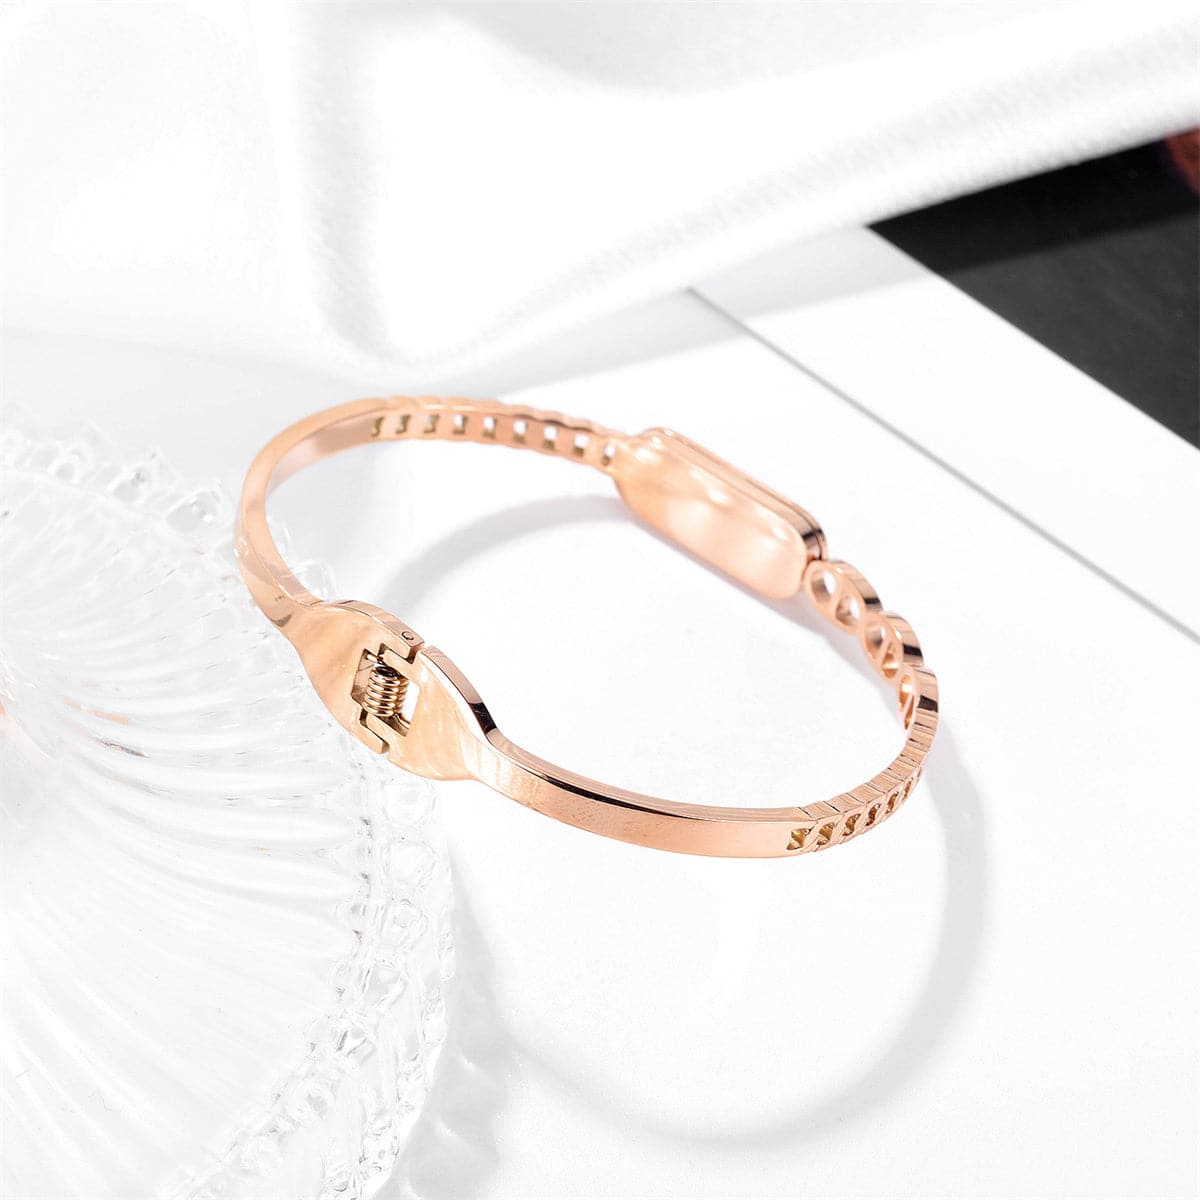 18K Rose Gold-Plated 'Good Luck' Curb Chain Bangle